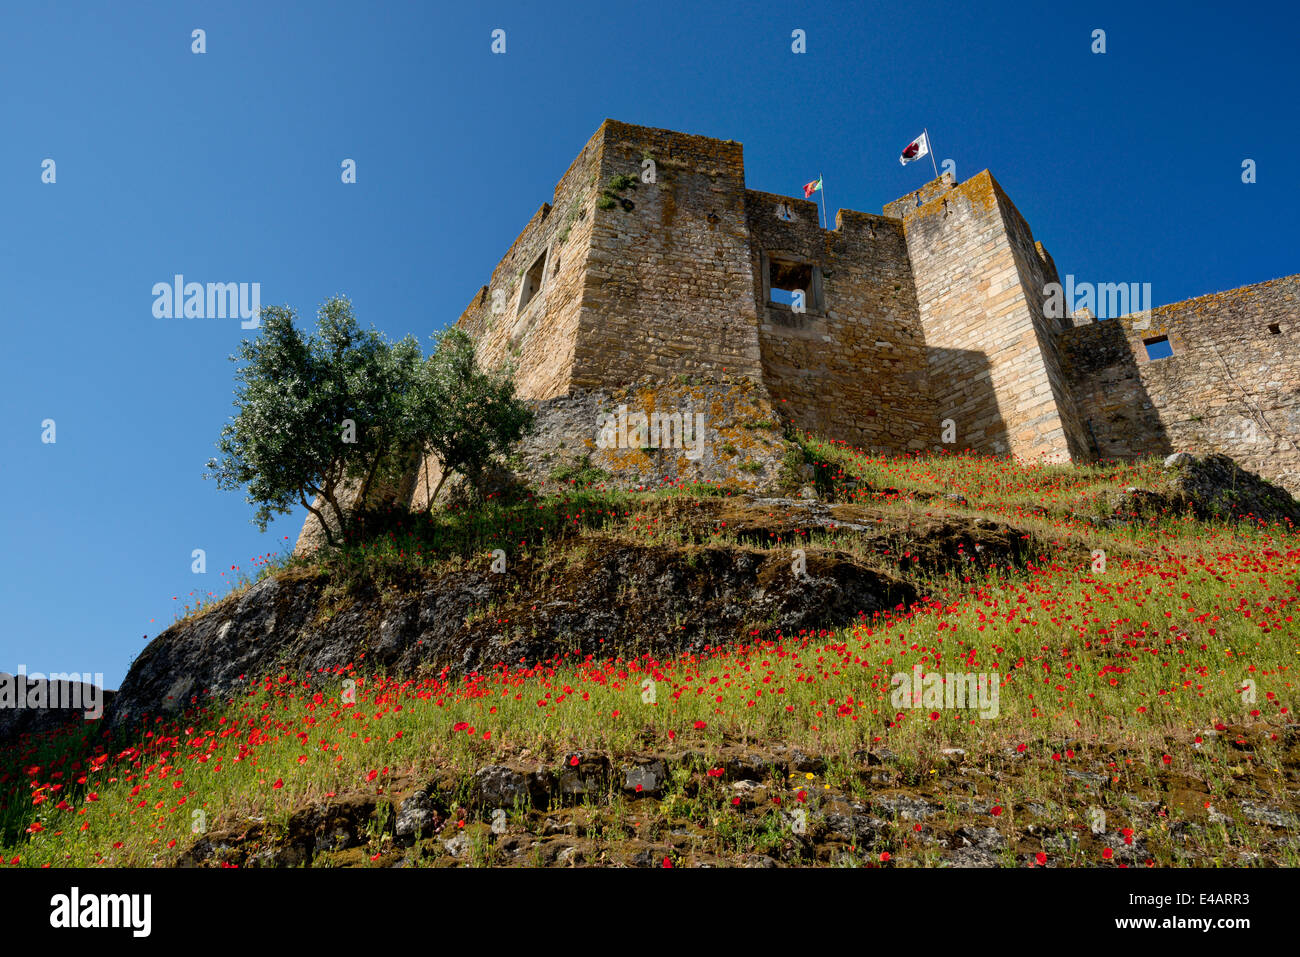 Central Portugal, the Ribatejo, Tomar, the Convento de Cristo convent fortifications with wild flowers Stock Photo